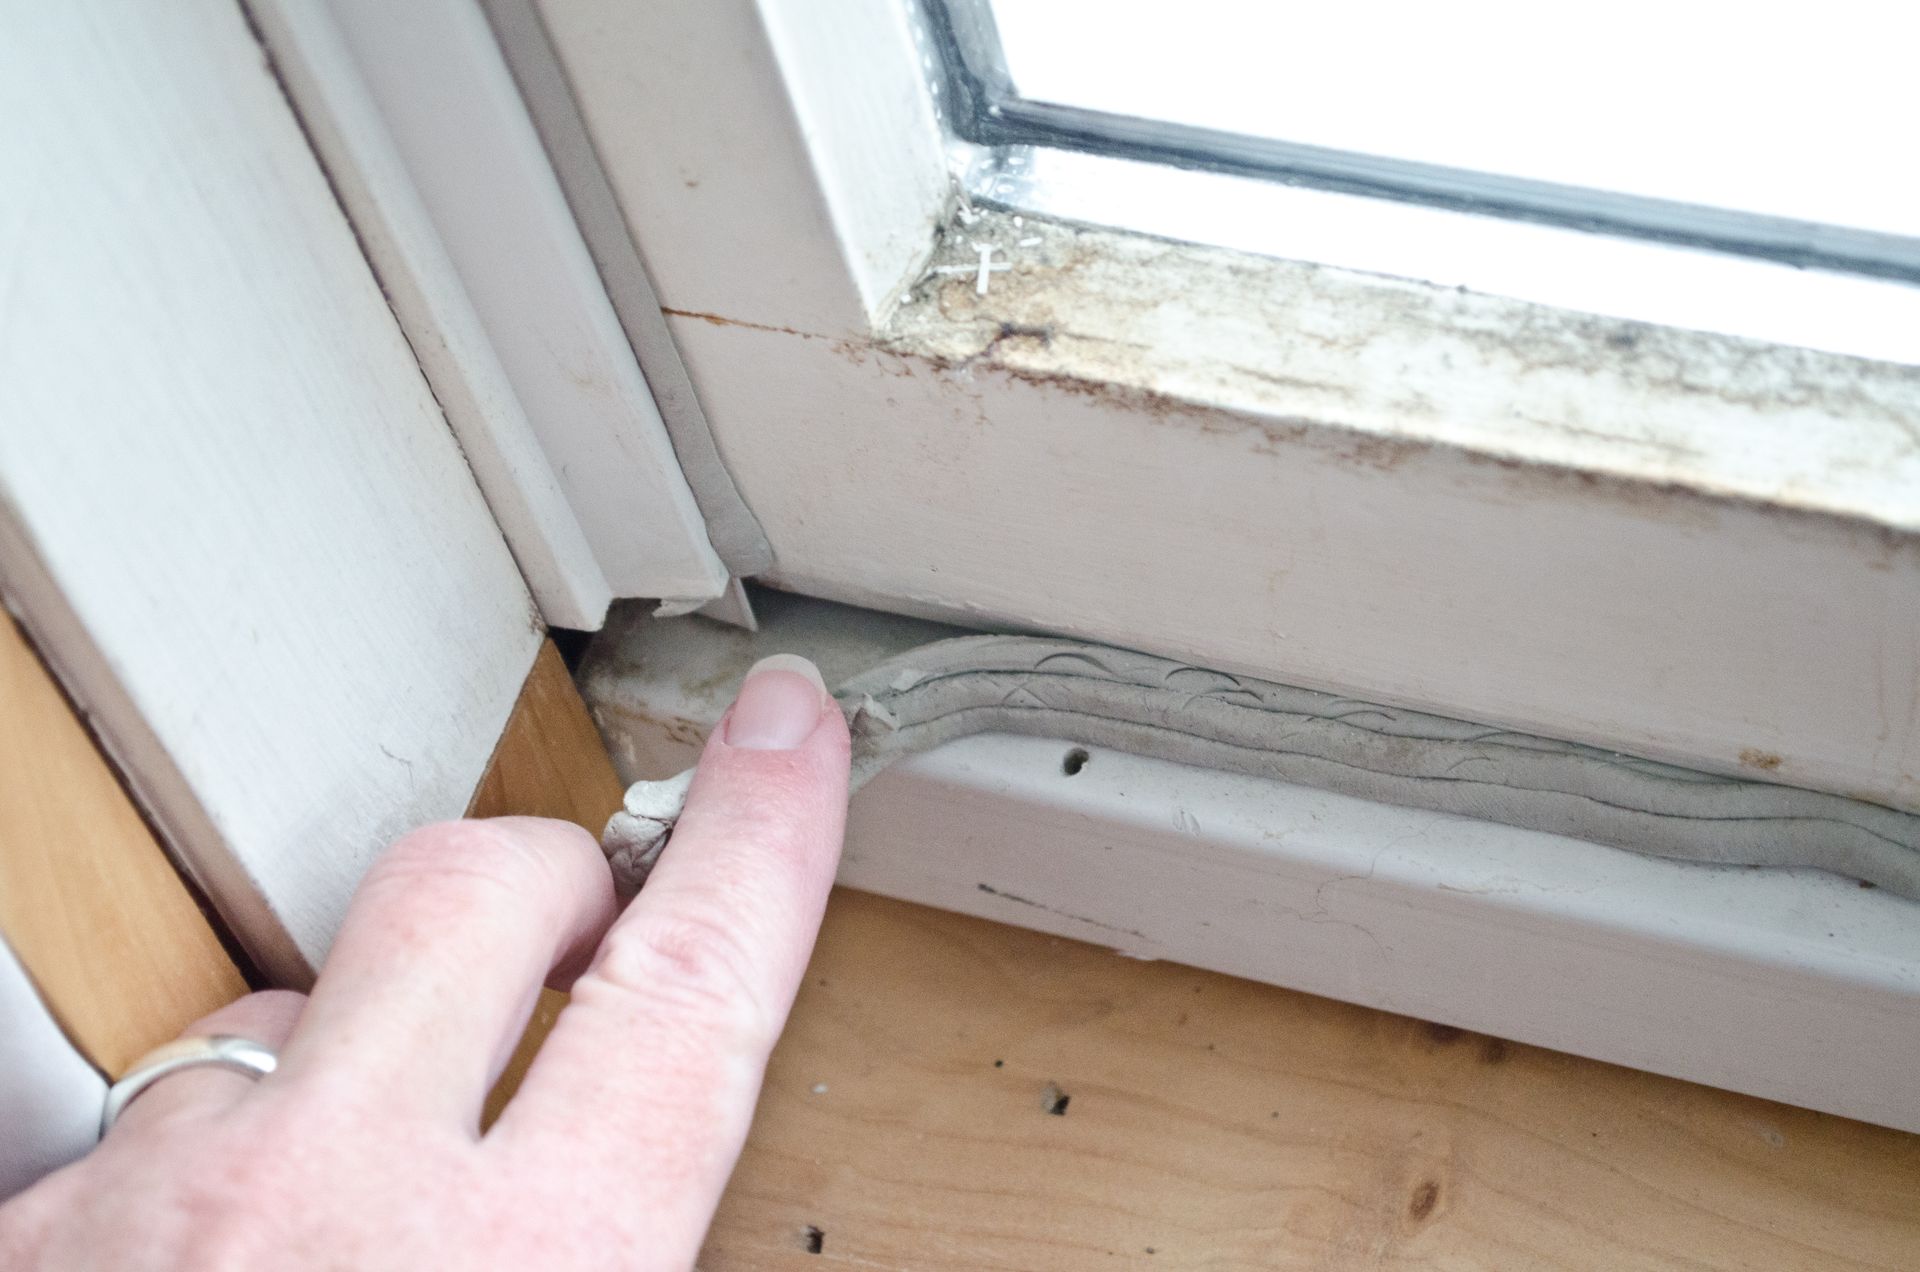 A person is pulling back bad sealing on a historic window, the window needs to be properly preserved